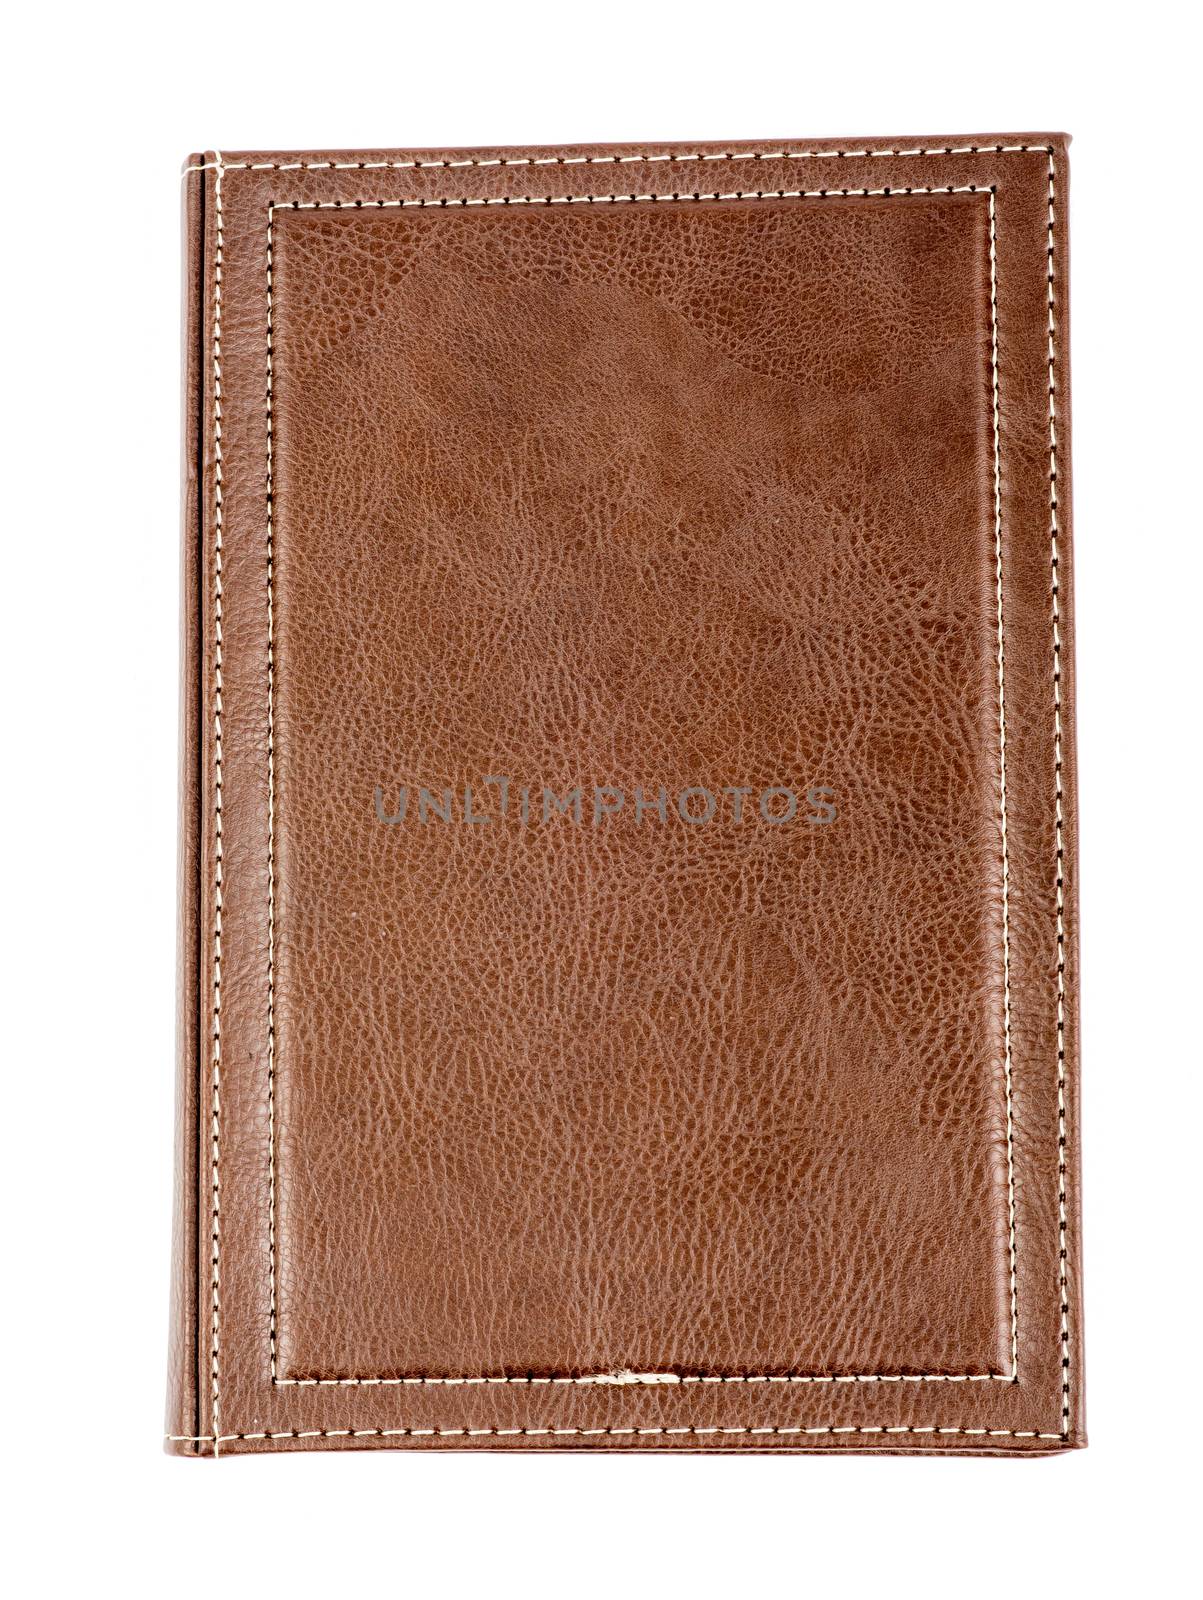 Leather daily planner on isolated white background